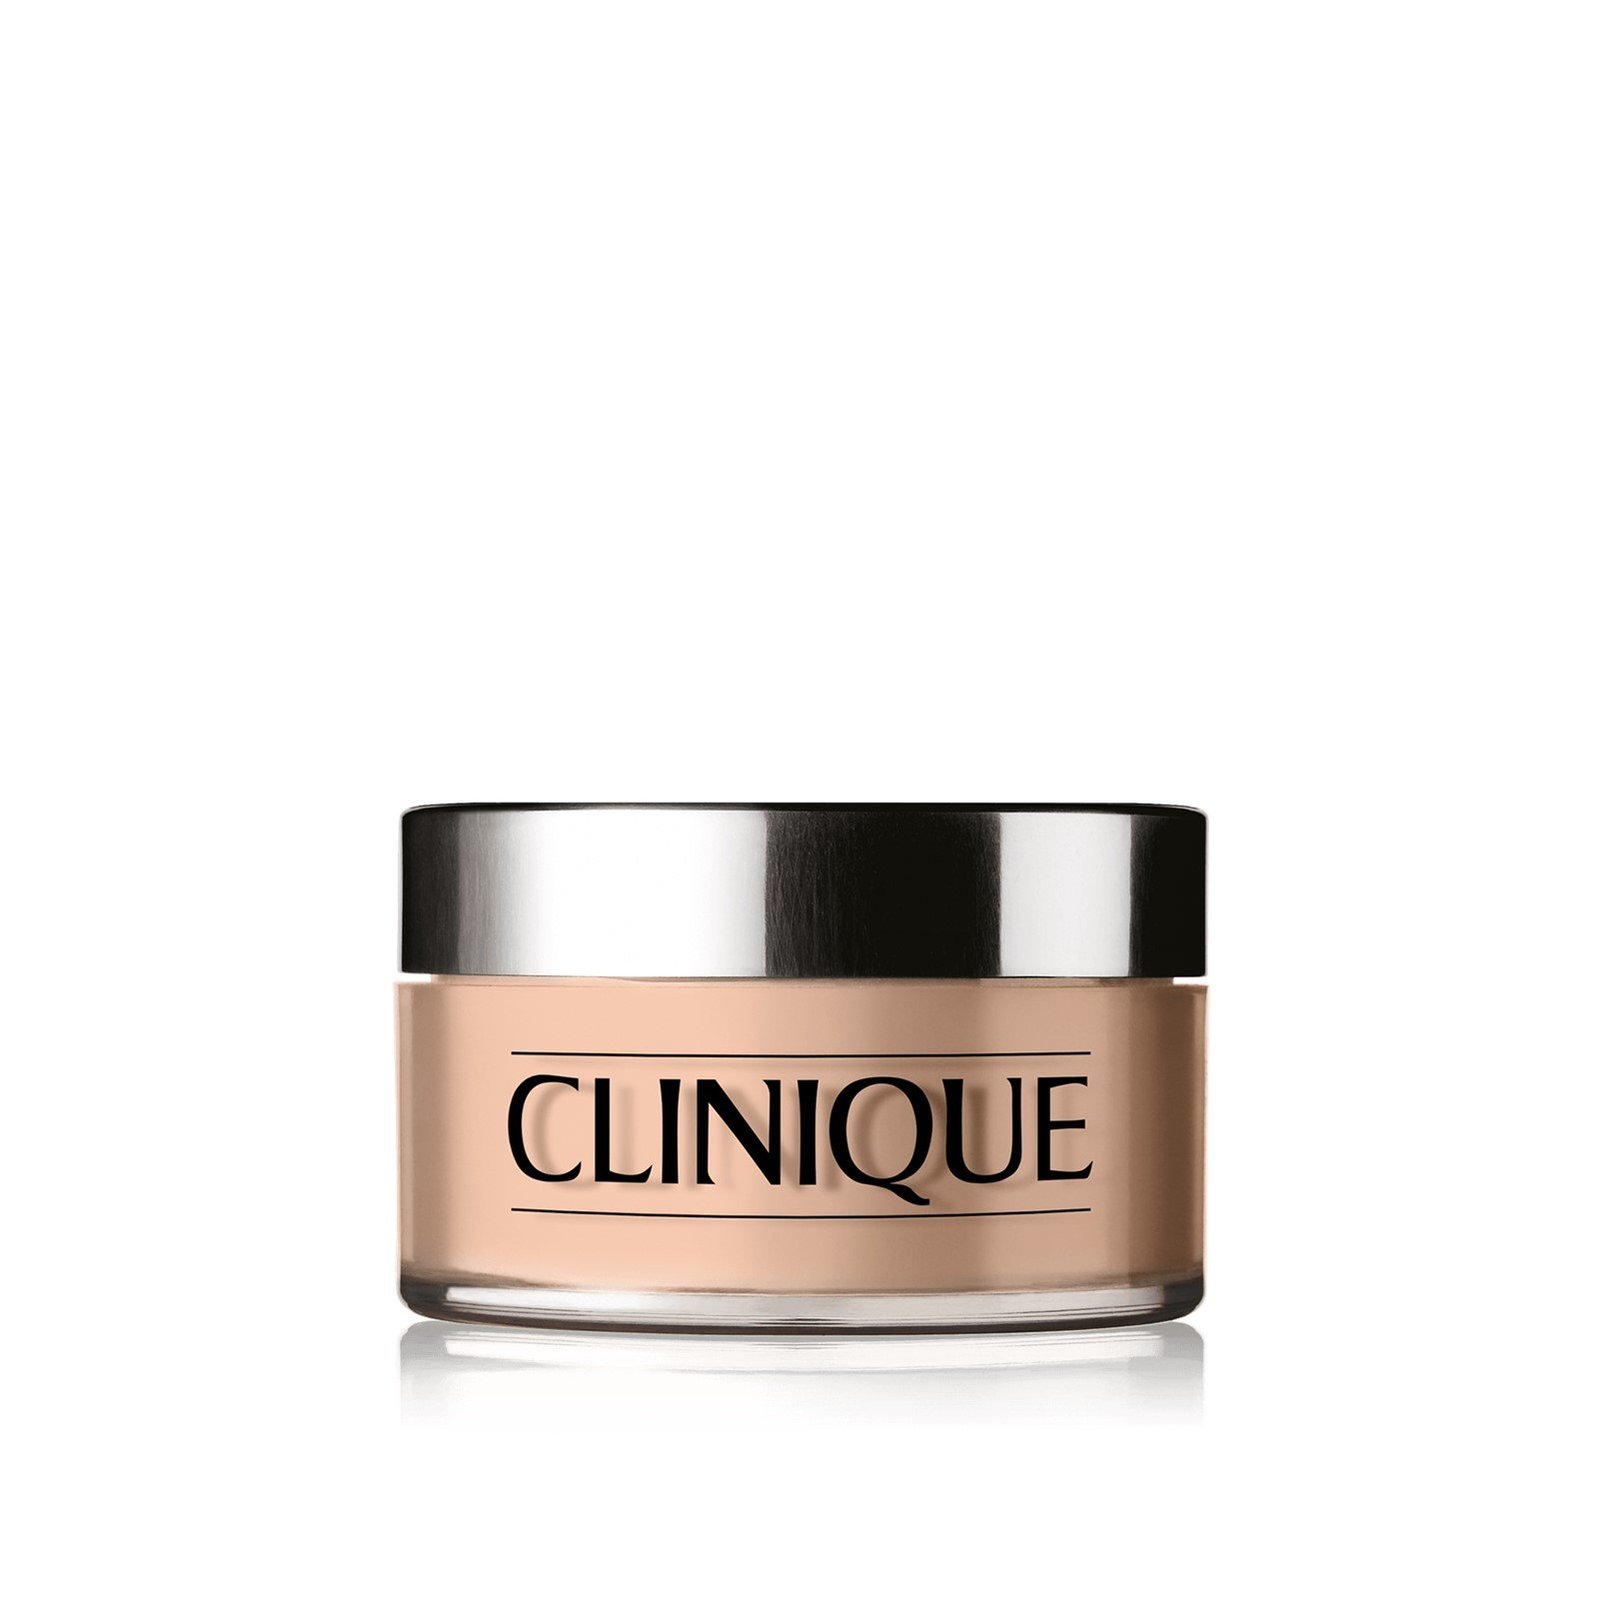 Clinique Blended Face Powder Transparency 4 25g